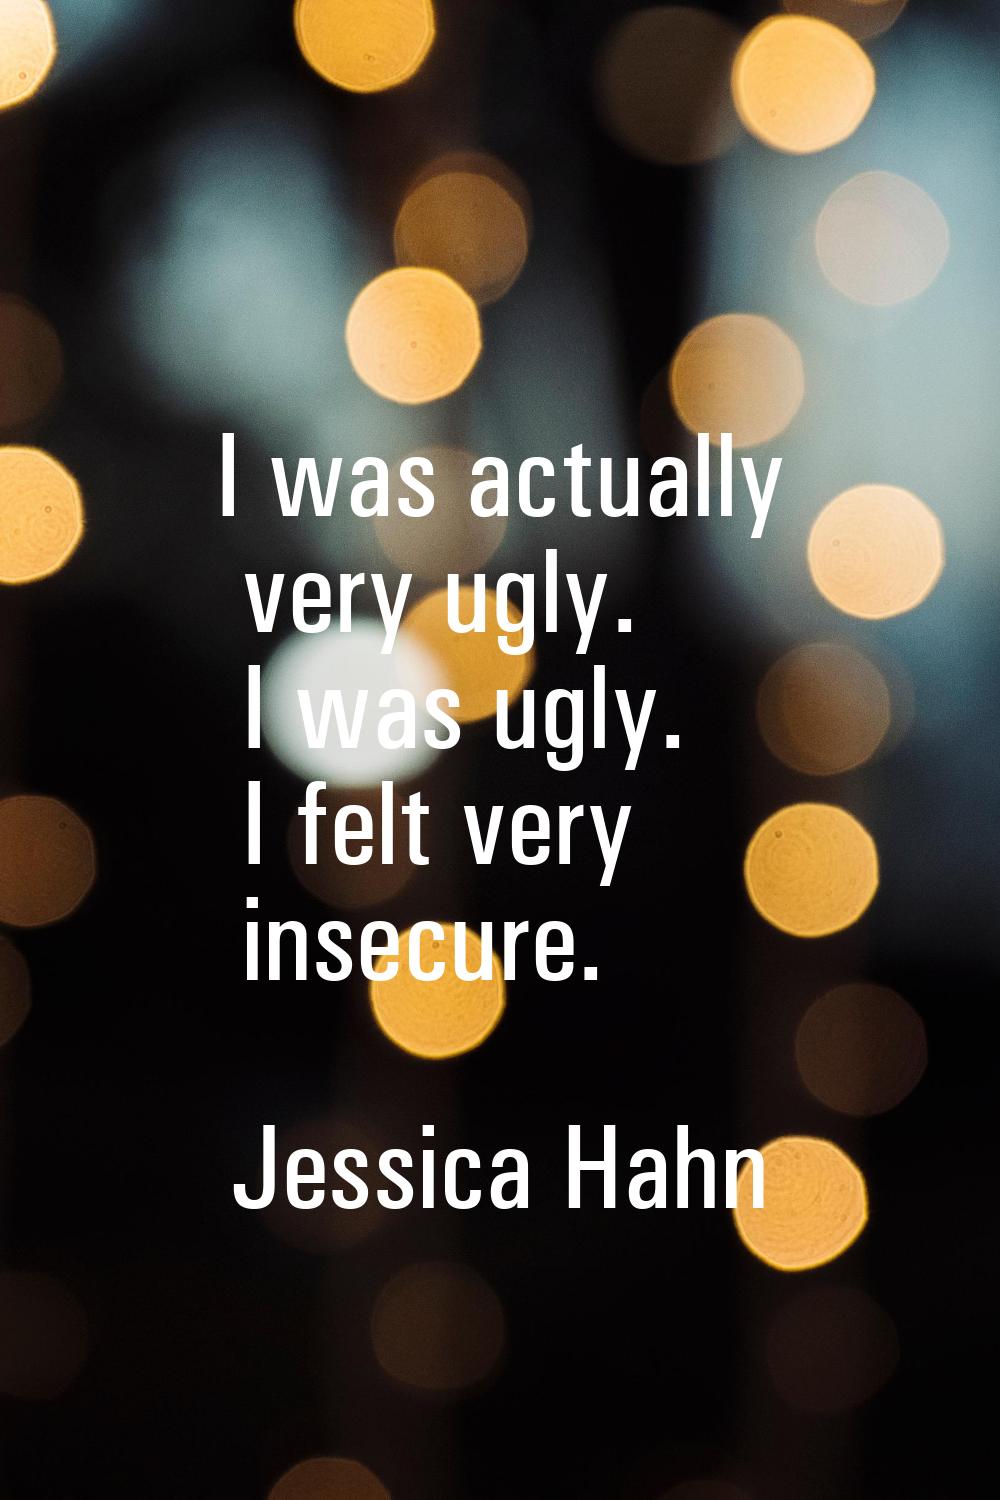 I was actually very ugly. I was ugly. I felt very insecure.